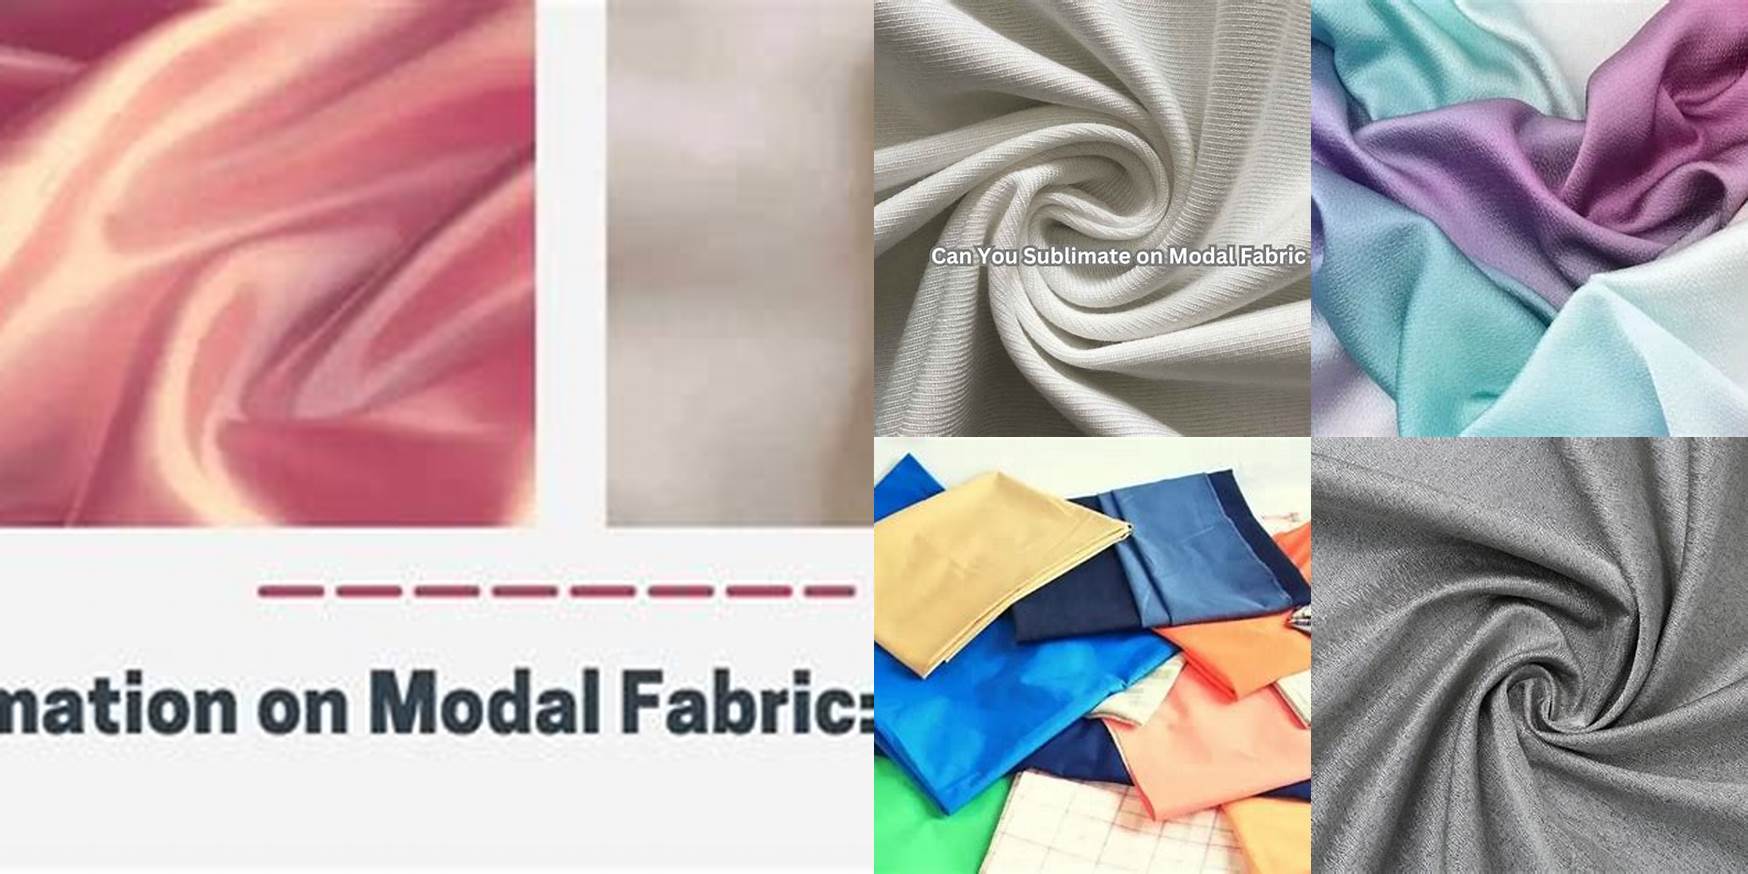 Can You Sublimate Modal Fabric